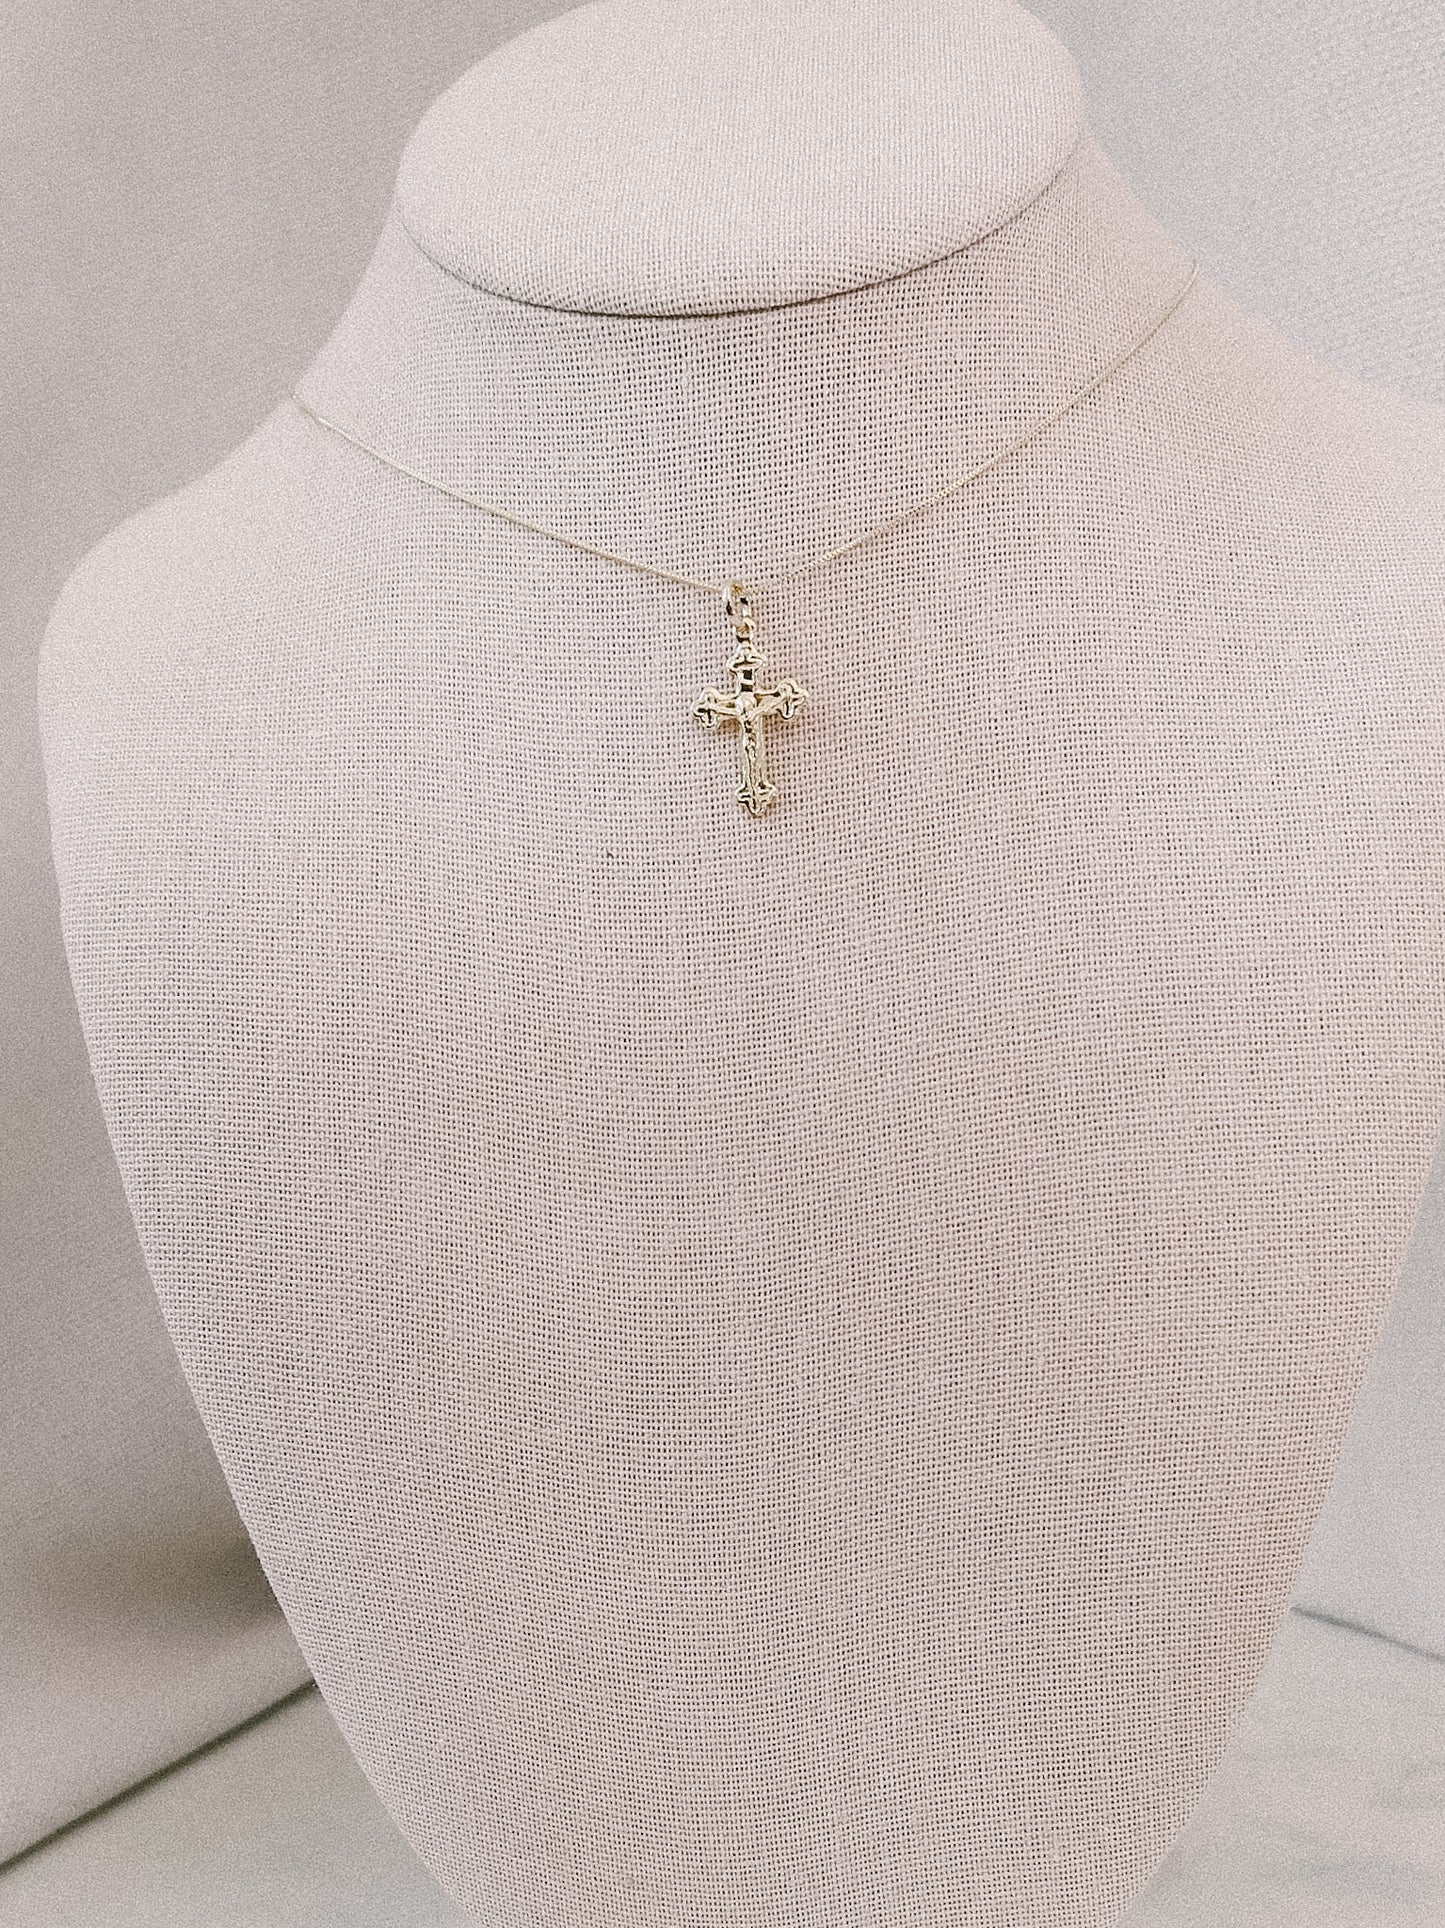 Crucifix Medal Pendant + Dainty Chain Necklace